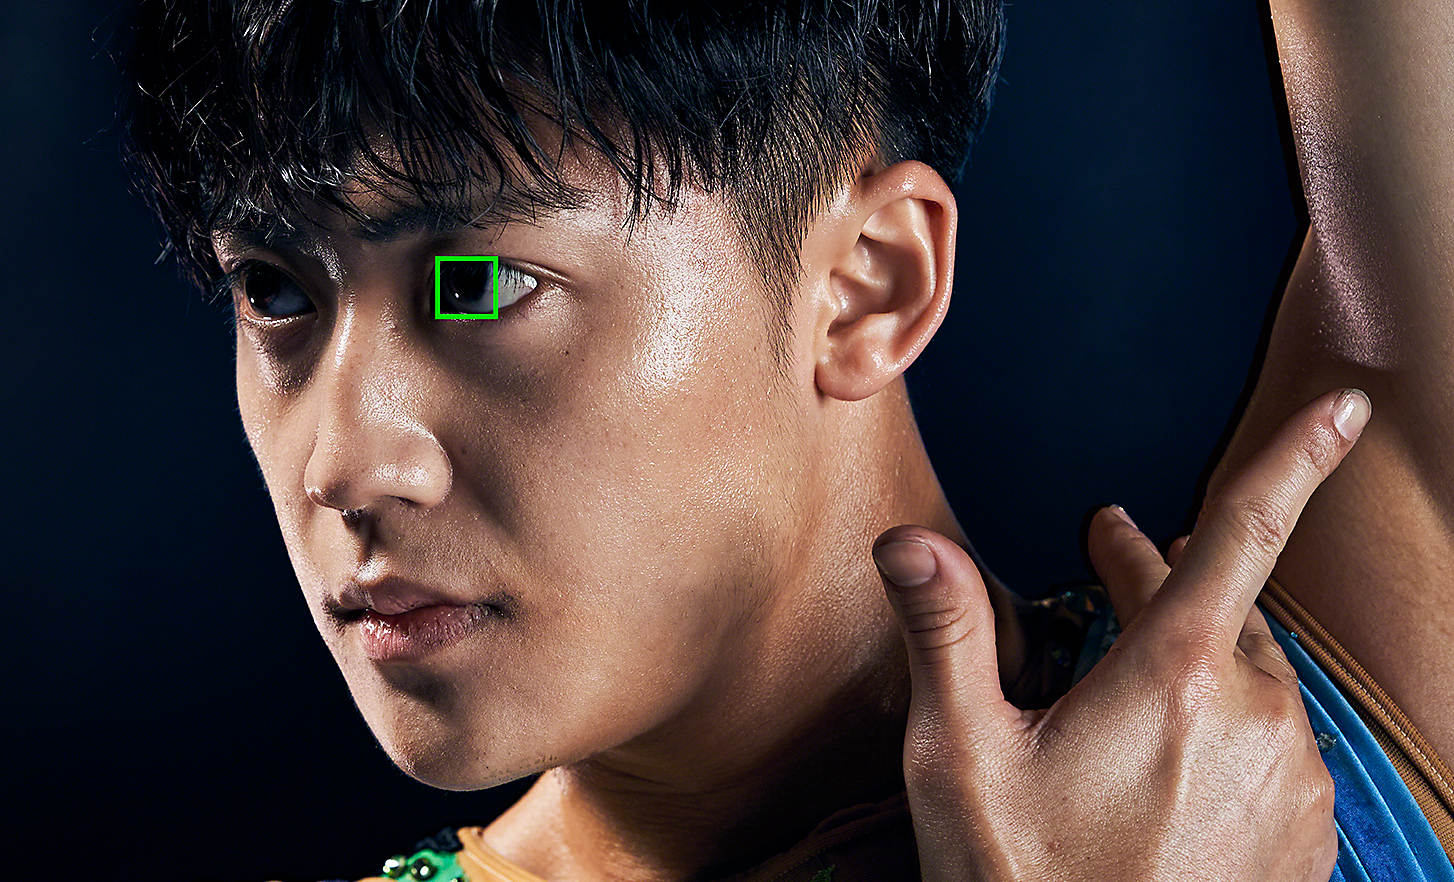 Portrait of a gymnast taken with 125mm lens - a green square over one of his eyes represents Real-time Eye AF